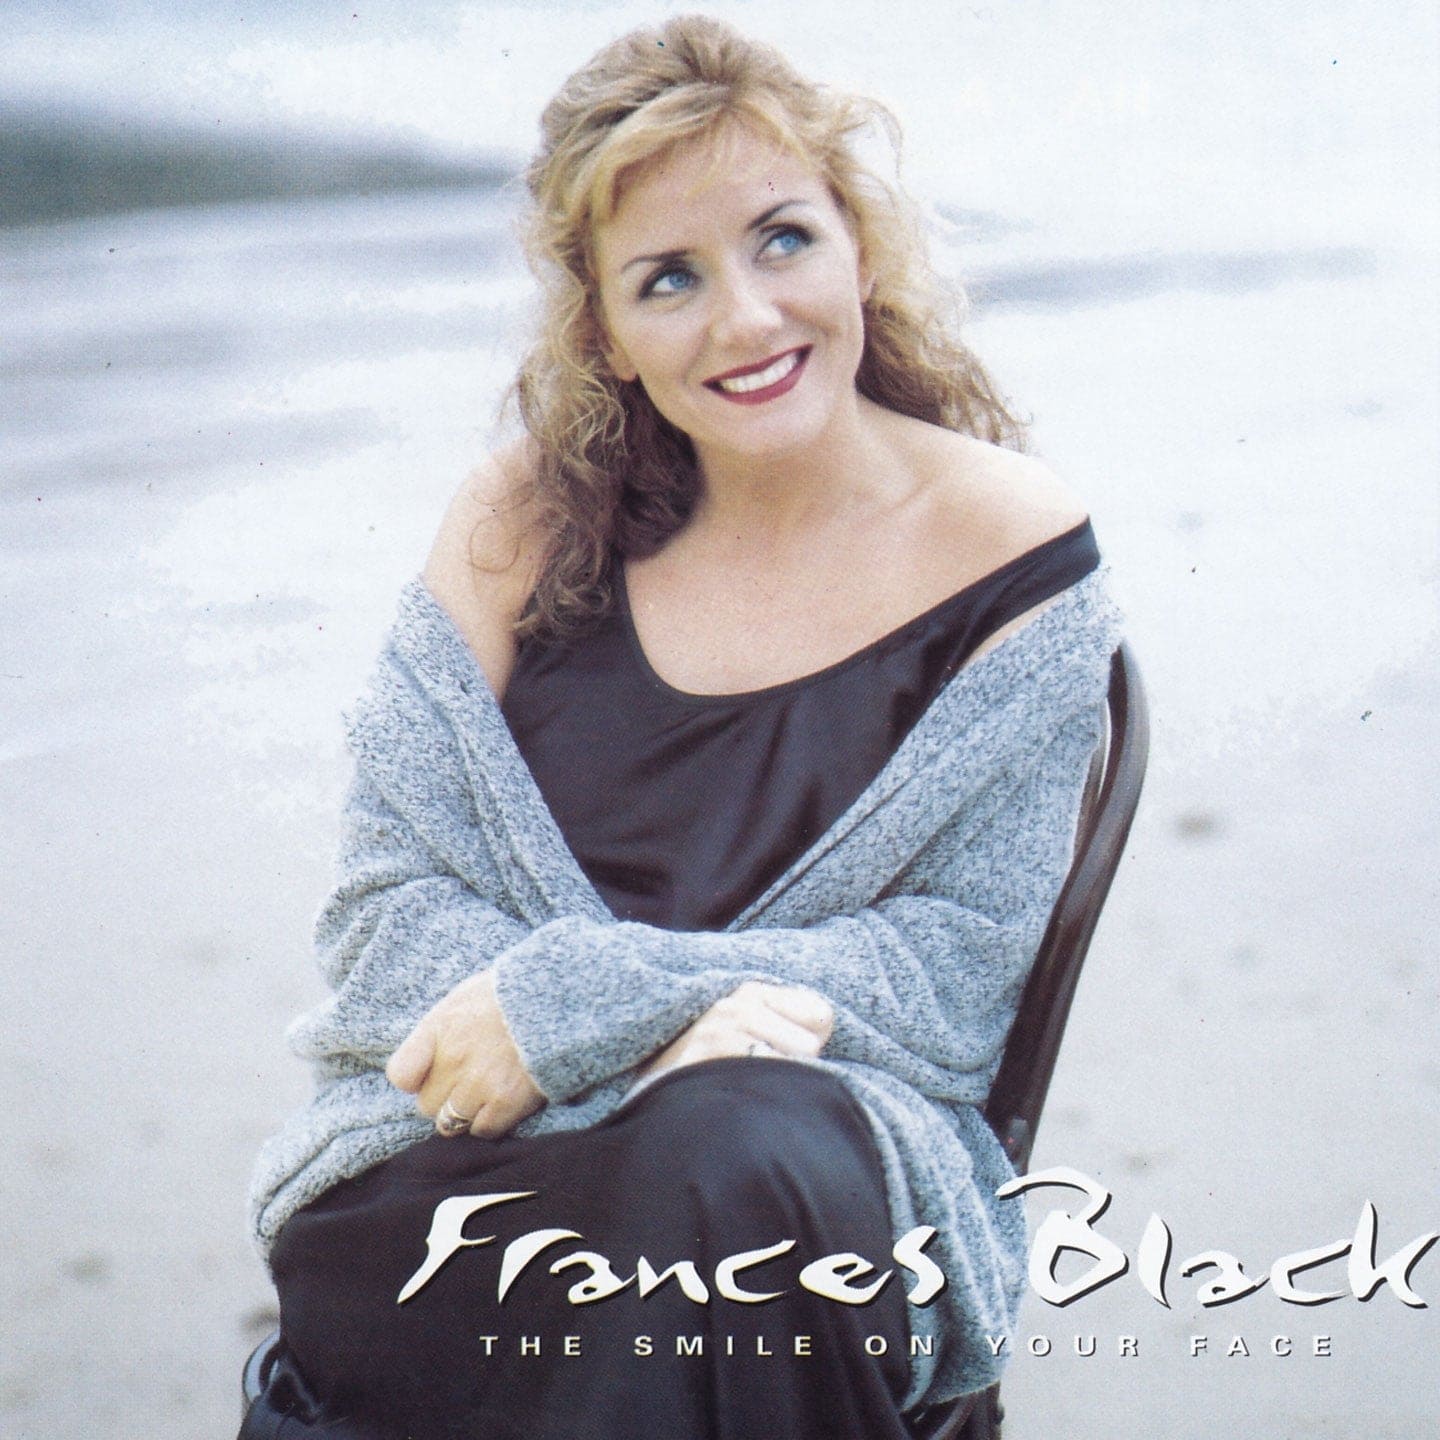 The Smile On Your Face - Frances Black [CD]